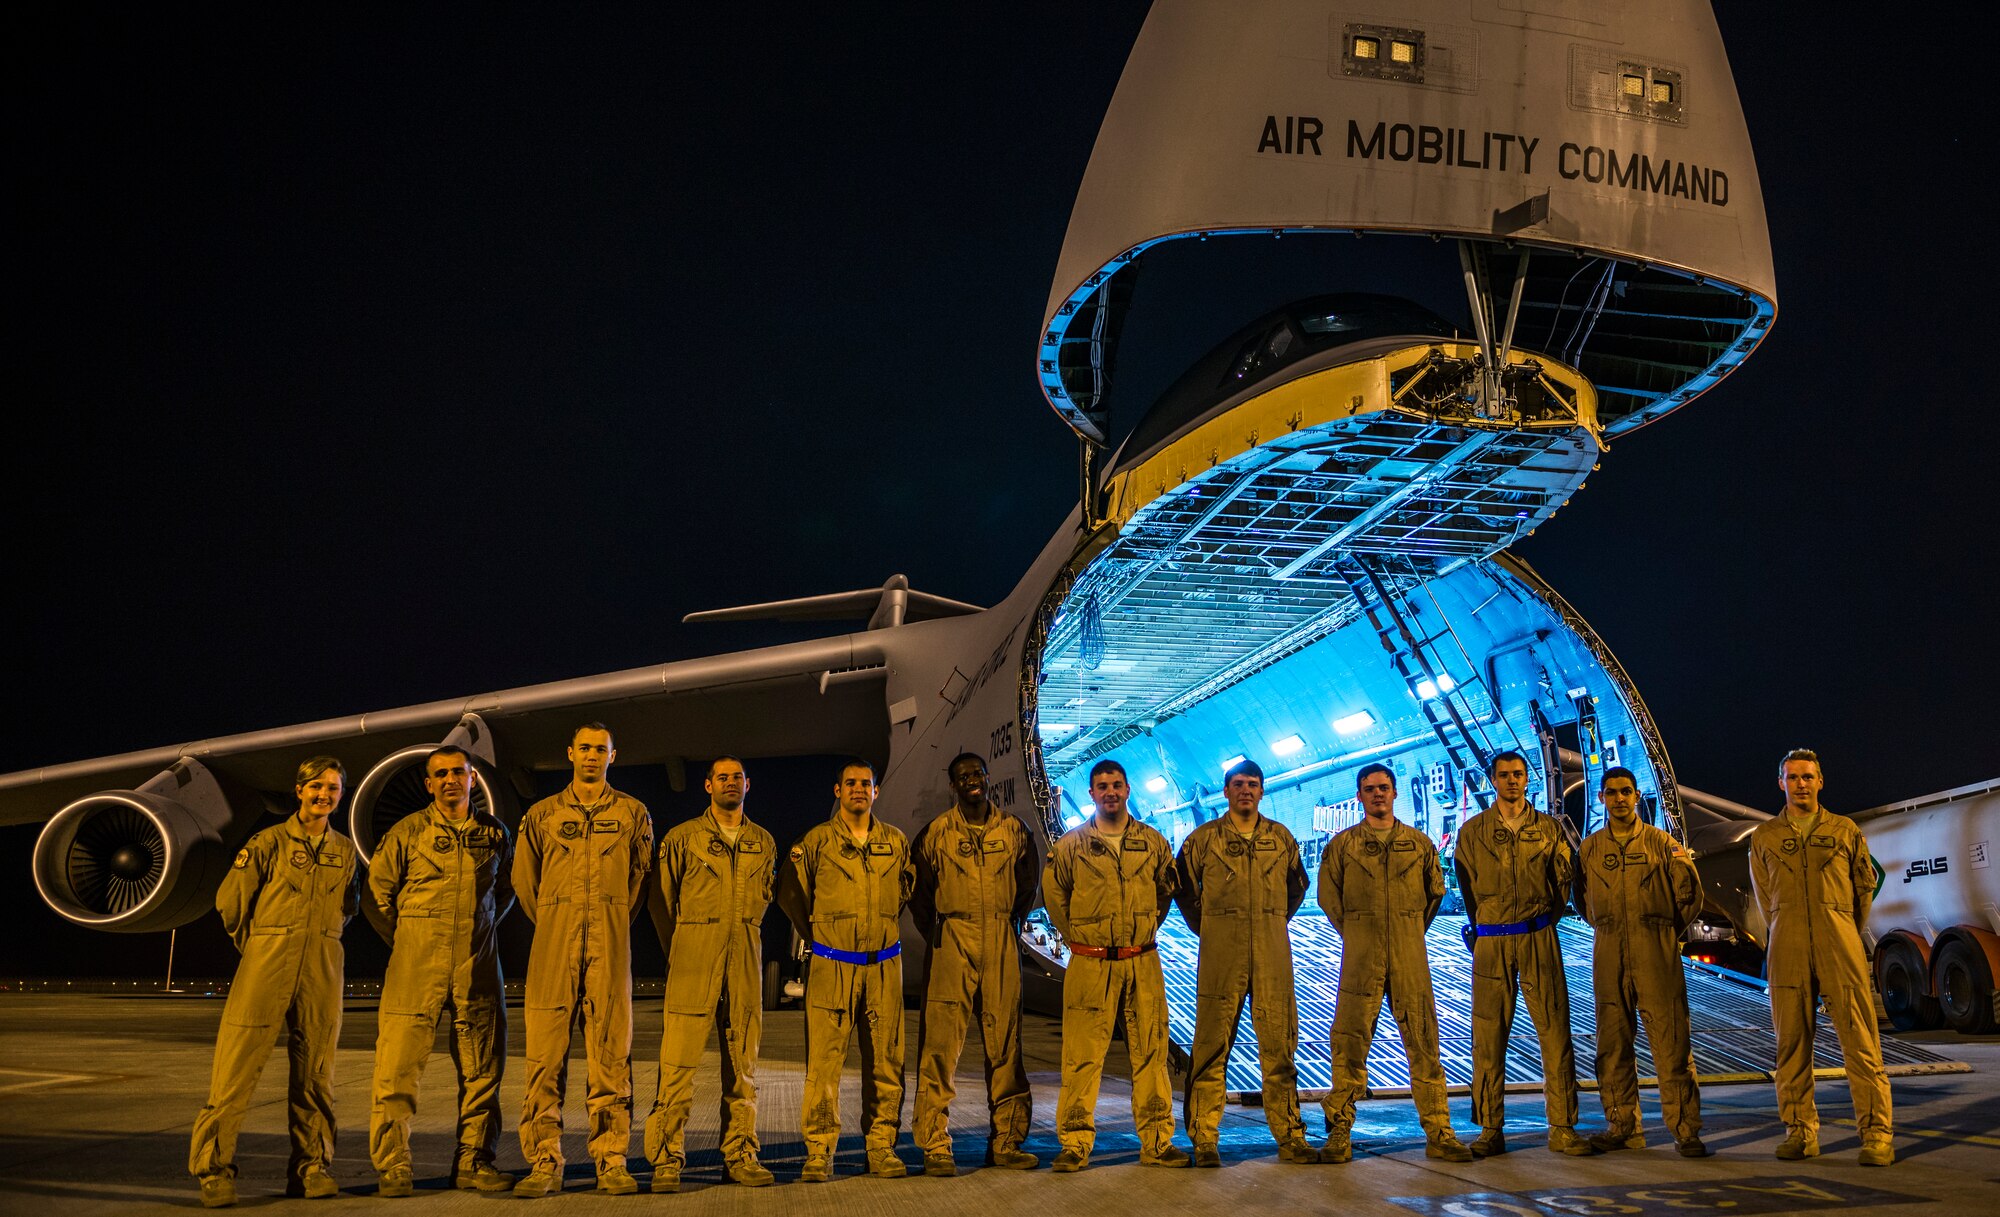 Aircrew from the 9th Airlift Squadron pose in front of a C-5M Super Galaxy after completing a mission to Afghanistan Oct. 7, 2014, at an undisclosed location in Southwest Asia. These Airmen transported more than 266,000 pounds of cargo as part of retrograde operations in Afghanistan. Aircrews for the retrograde operations, managed by the 385th Air Expeditionary Group Detachment 1, surpassed 11 million pounds of cargo transported in a 50-day period. During this time frame, crews under the 385th AEG broke Air Mobility Command’s operational cargo load record five times. The heaviest load to date is 280,880 pounds. (U.S. Air Force photo by Staff Sgt. Jeremy Bowcock)